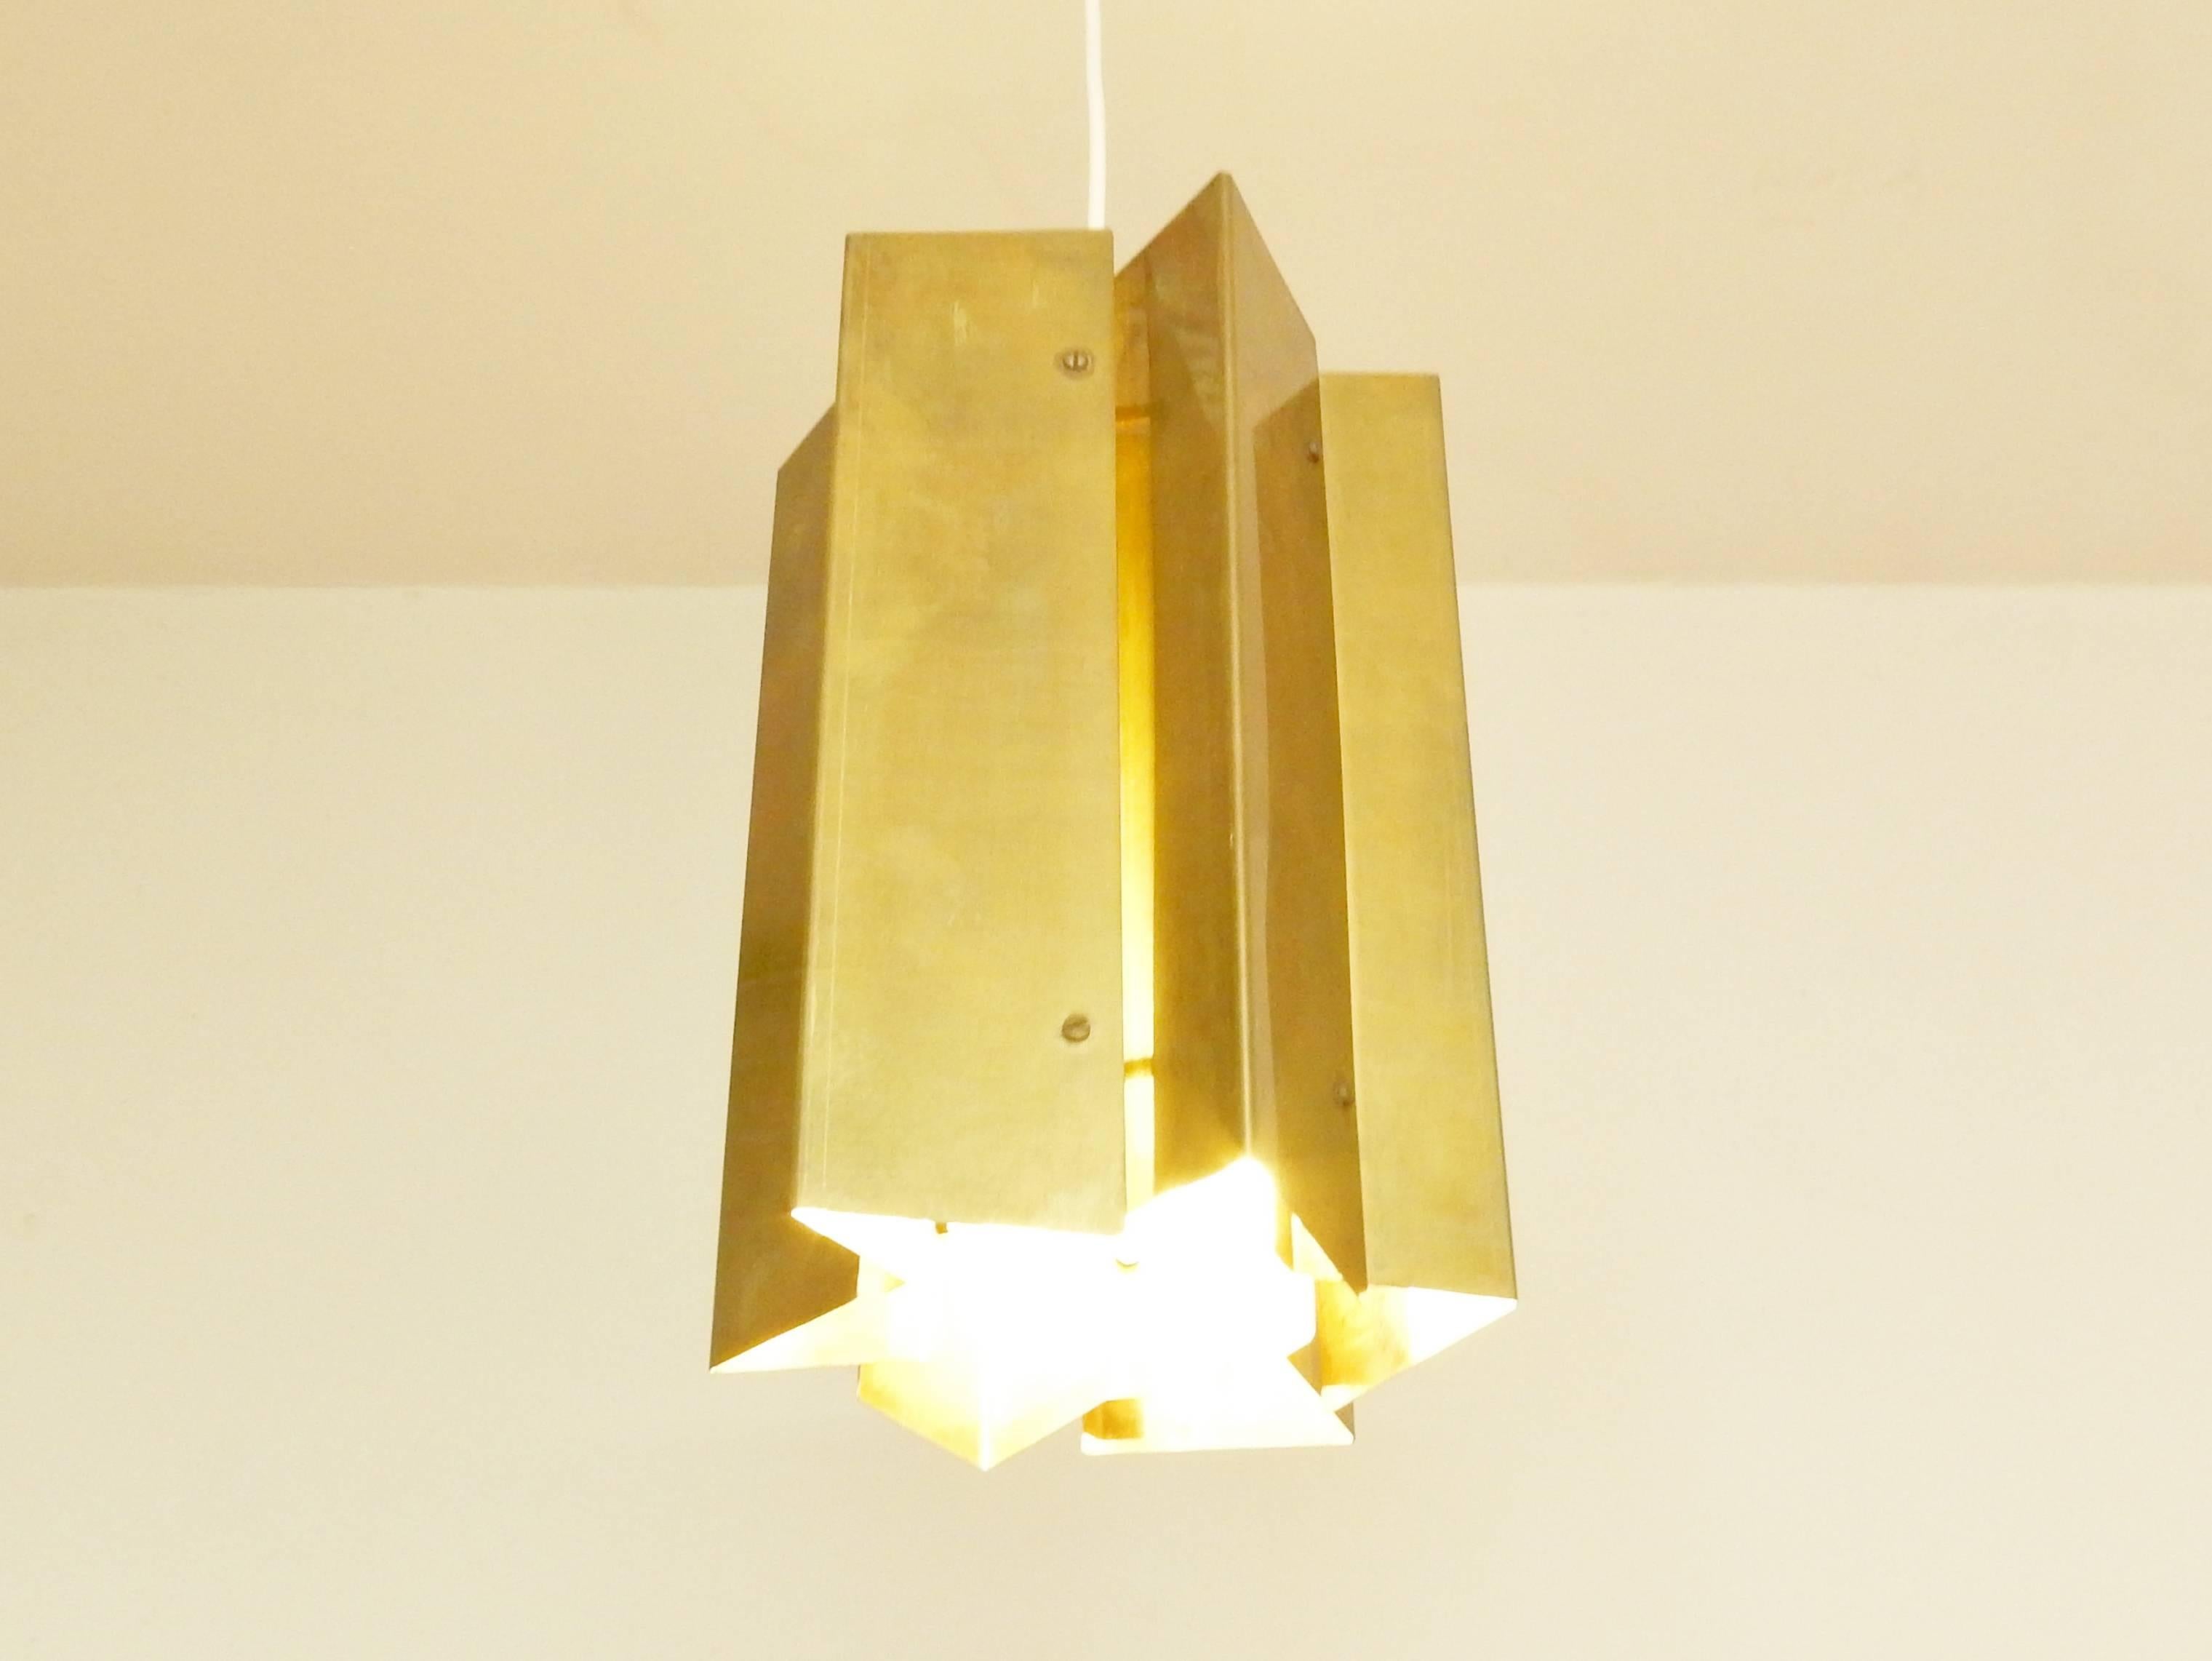 Very goodlooking pendant lamp in solid brass. The design of this lamp instantly reminds us of a combination of two designs by Simon Henningsen. The 'Tivoli' or 'Divan 2' pendant lamp and the 'Kassablanka' lamp. 

This light is in a very good